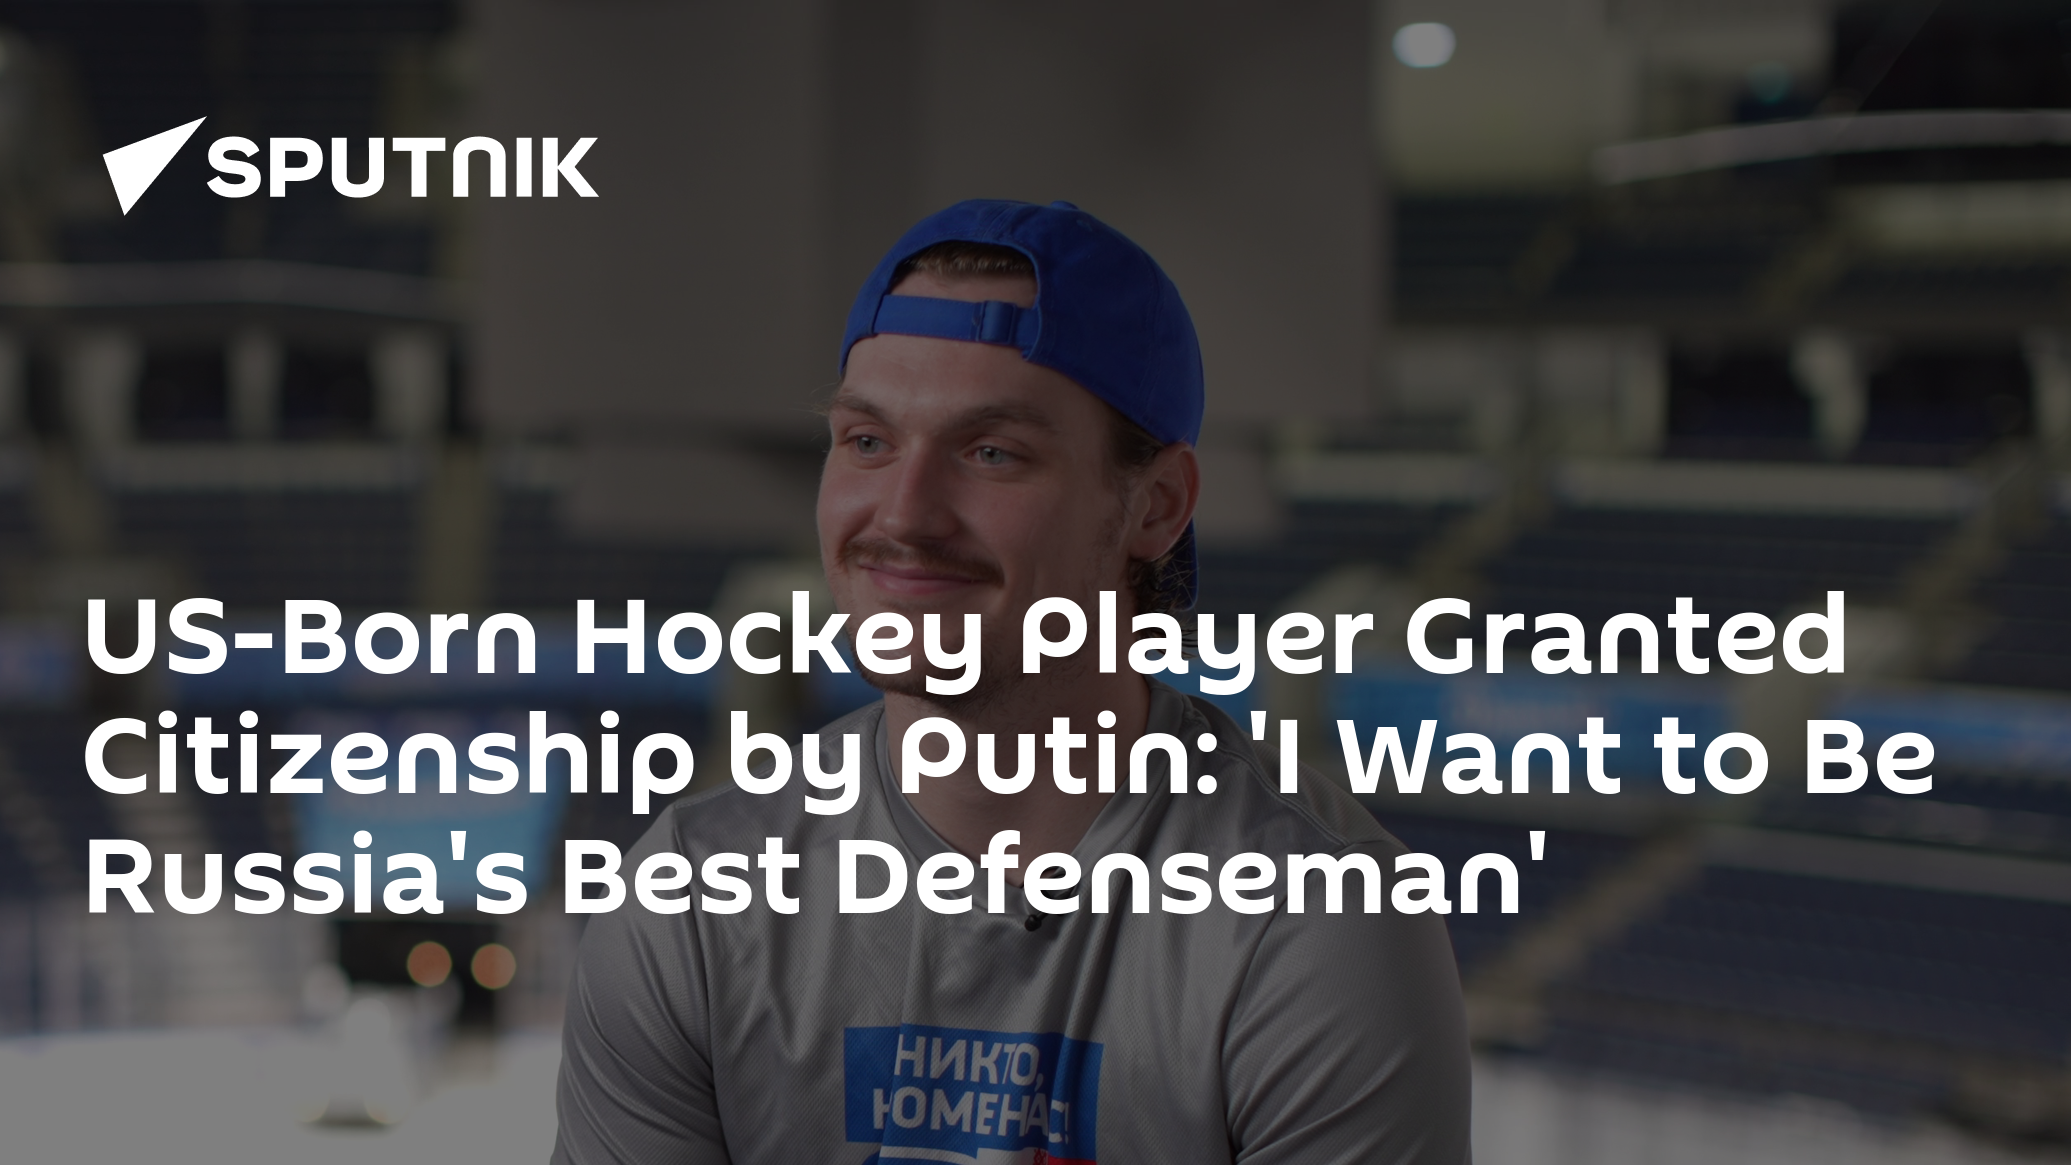 US-Born Hockey Player Granted Citizenship by Putin: 'I Want to Be Russia's Best Defenseman'